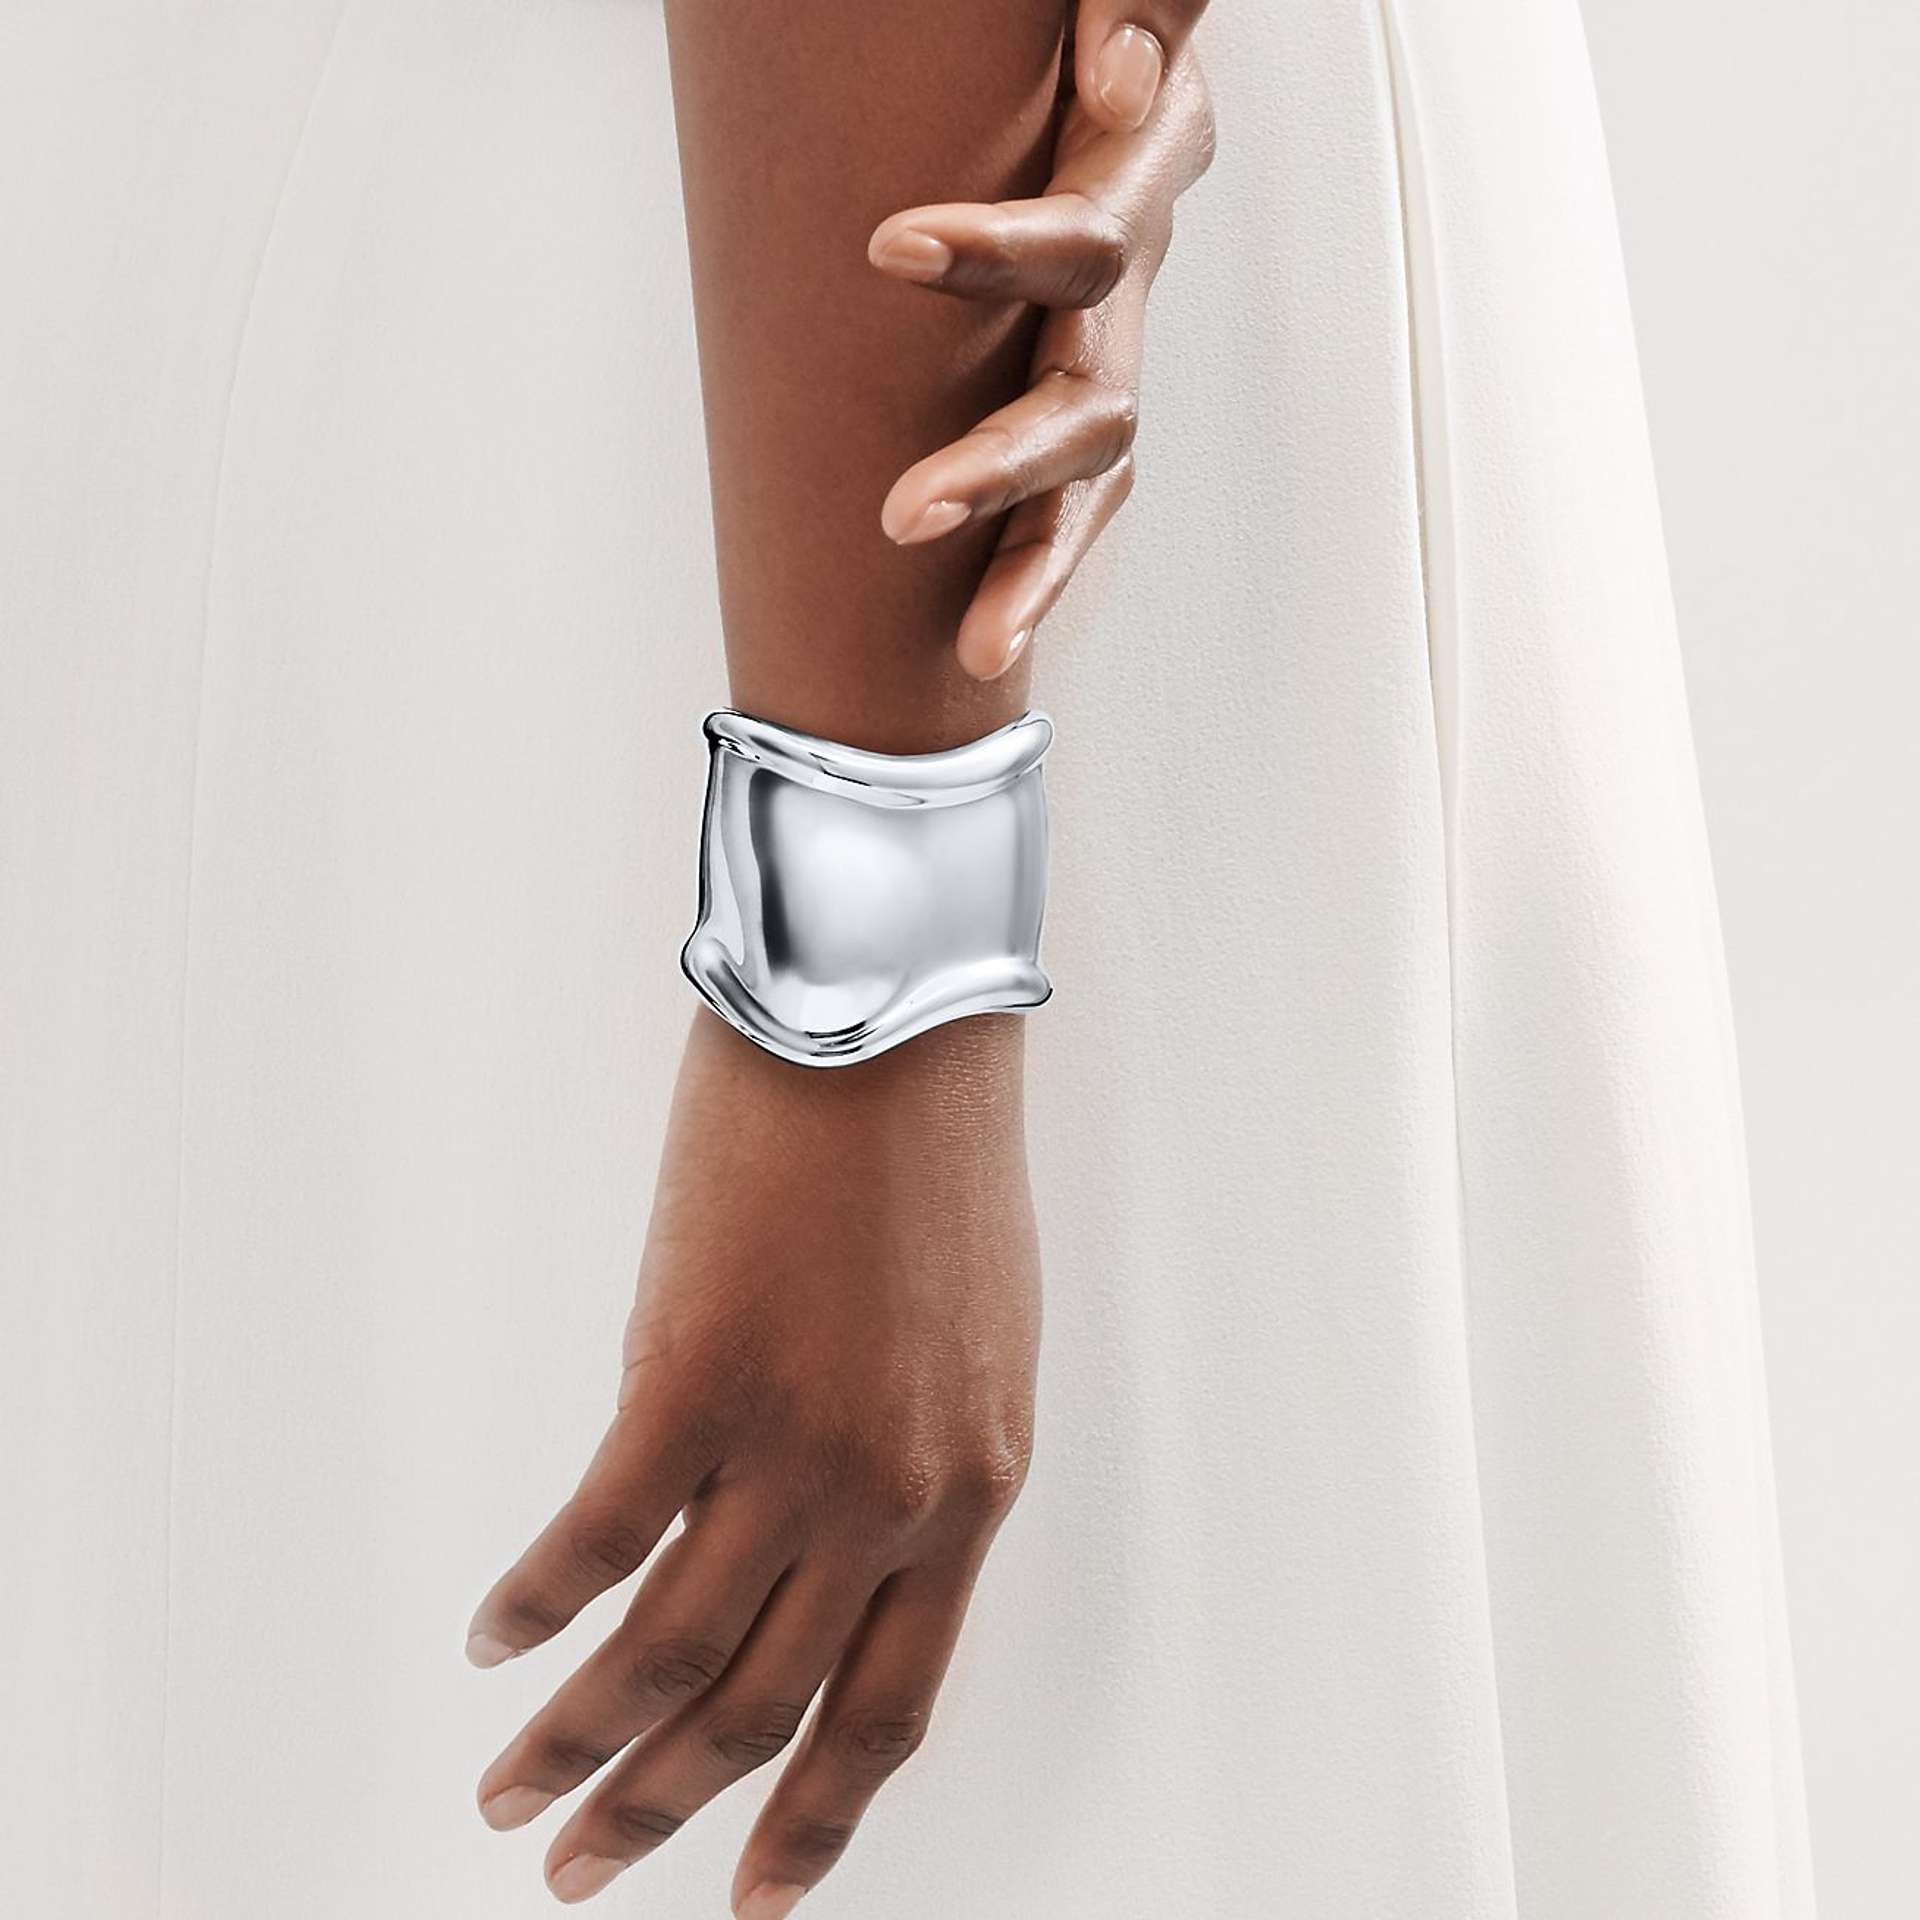 An image of a model wearing a silver version of Elsa Peretti’s Bone Cuff by Tiffany & Co.